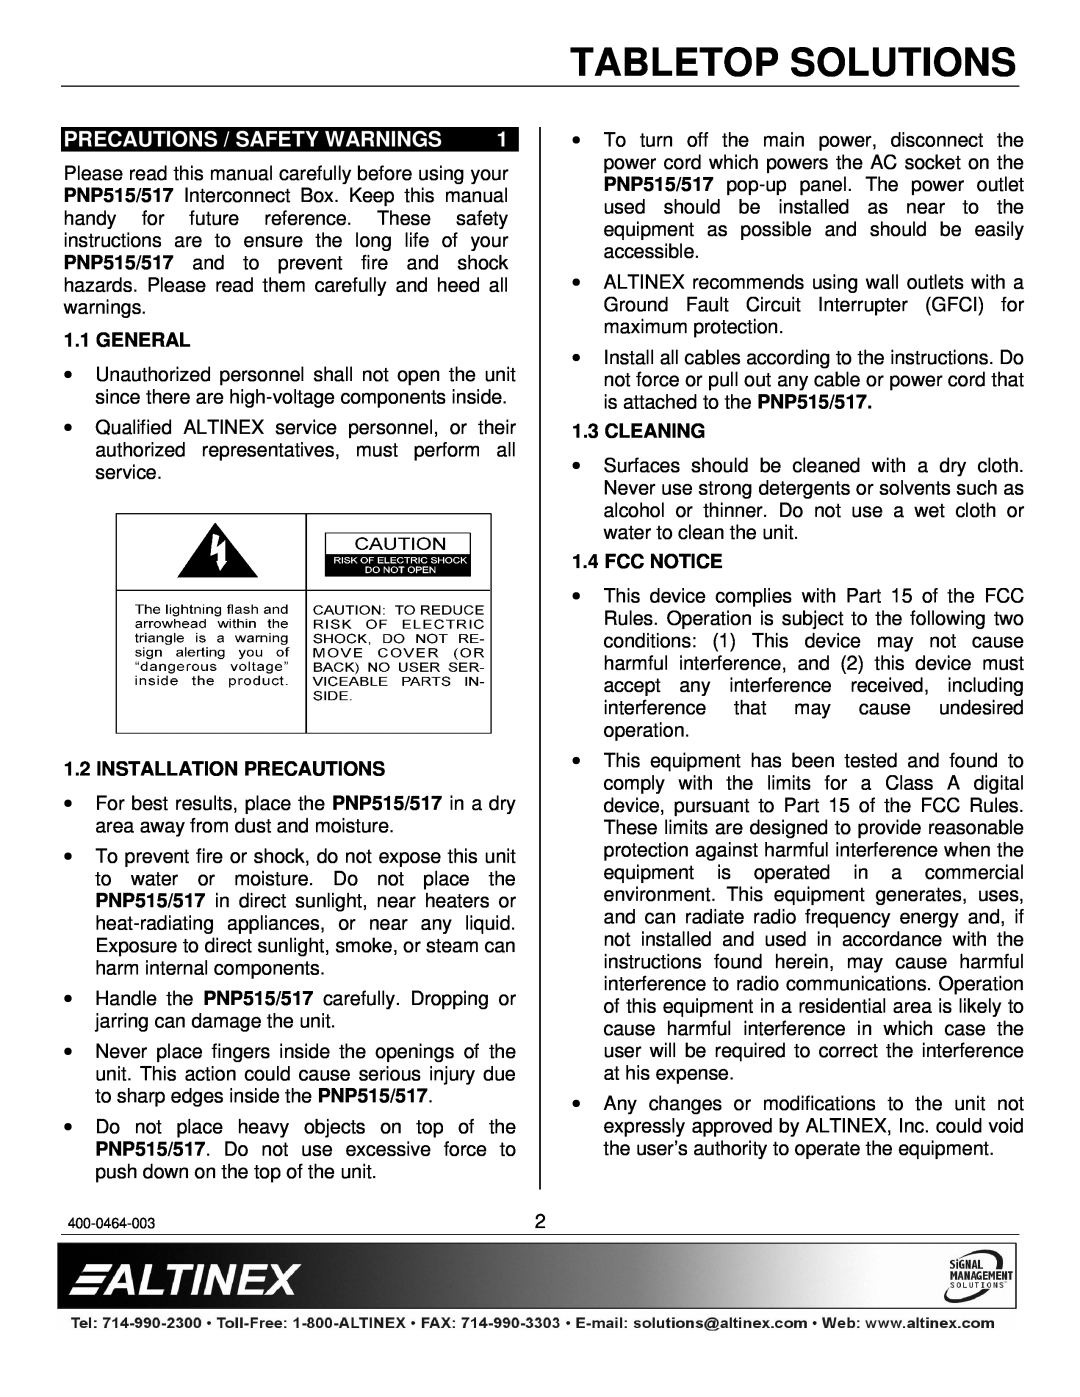 Altinex PNP537C Precautions / Safety Warnings, Tabletop Solutions, General, Installation Precautions, Cleaning, Fcc Notice 